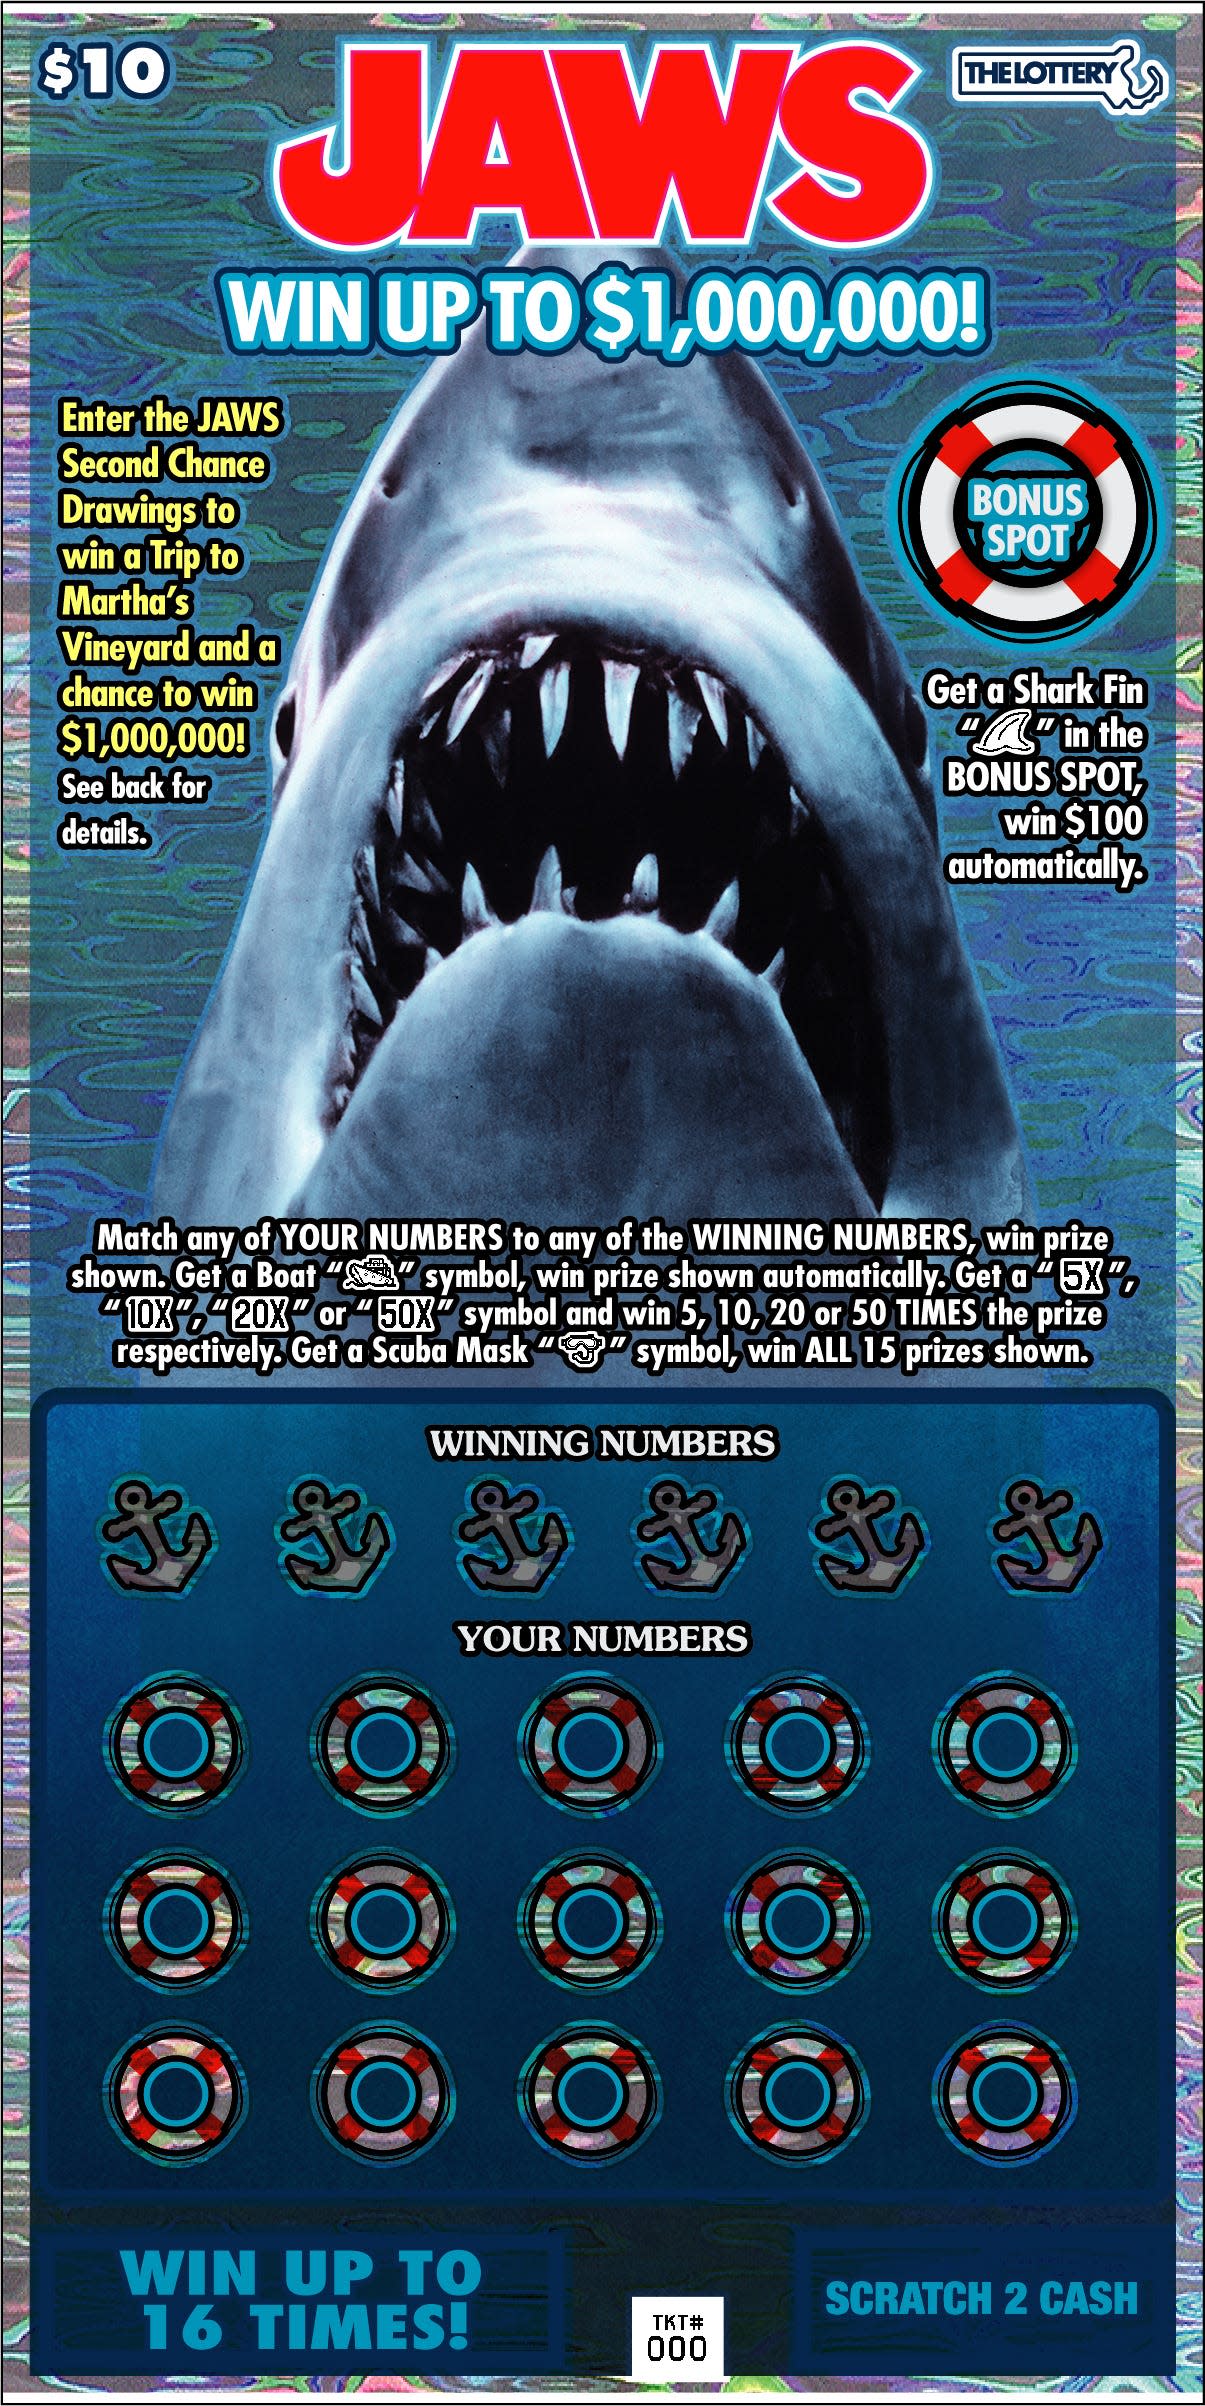 MassLottery has launched a new instant ticket with the theme of the 1975 summer blockbuster "Jaws."